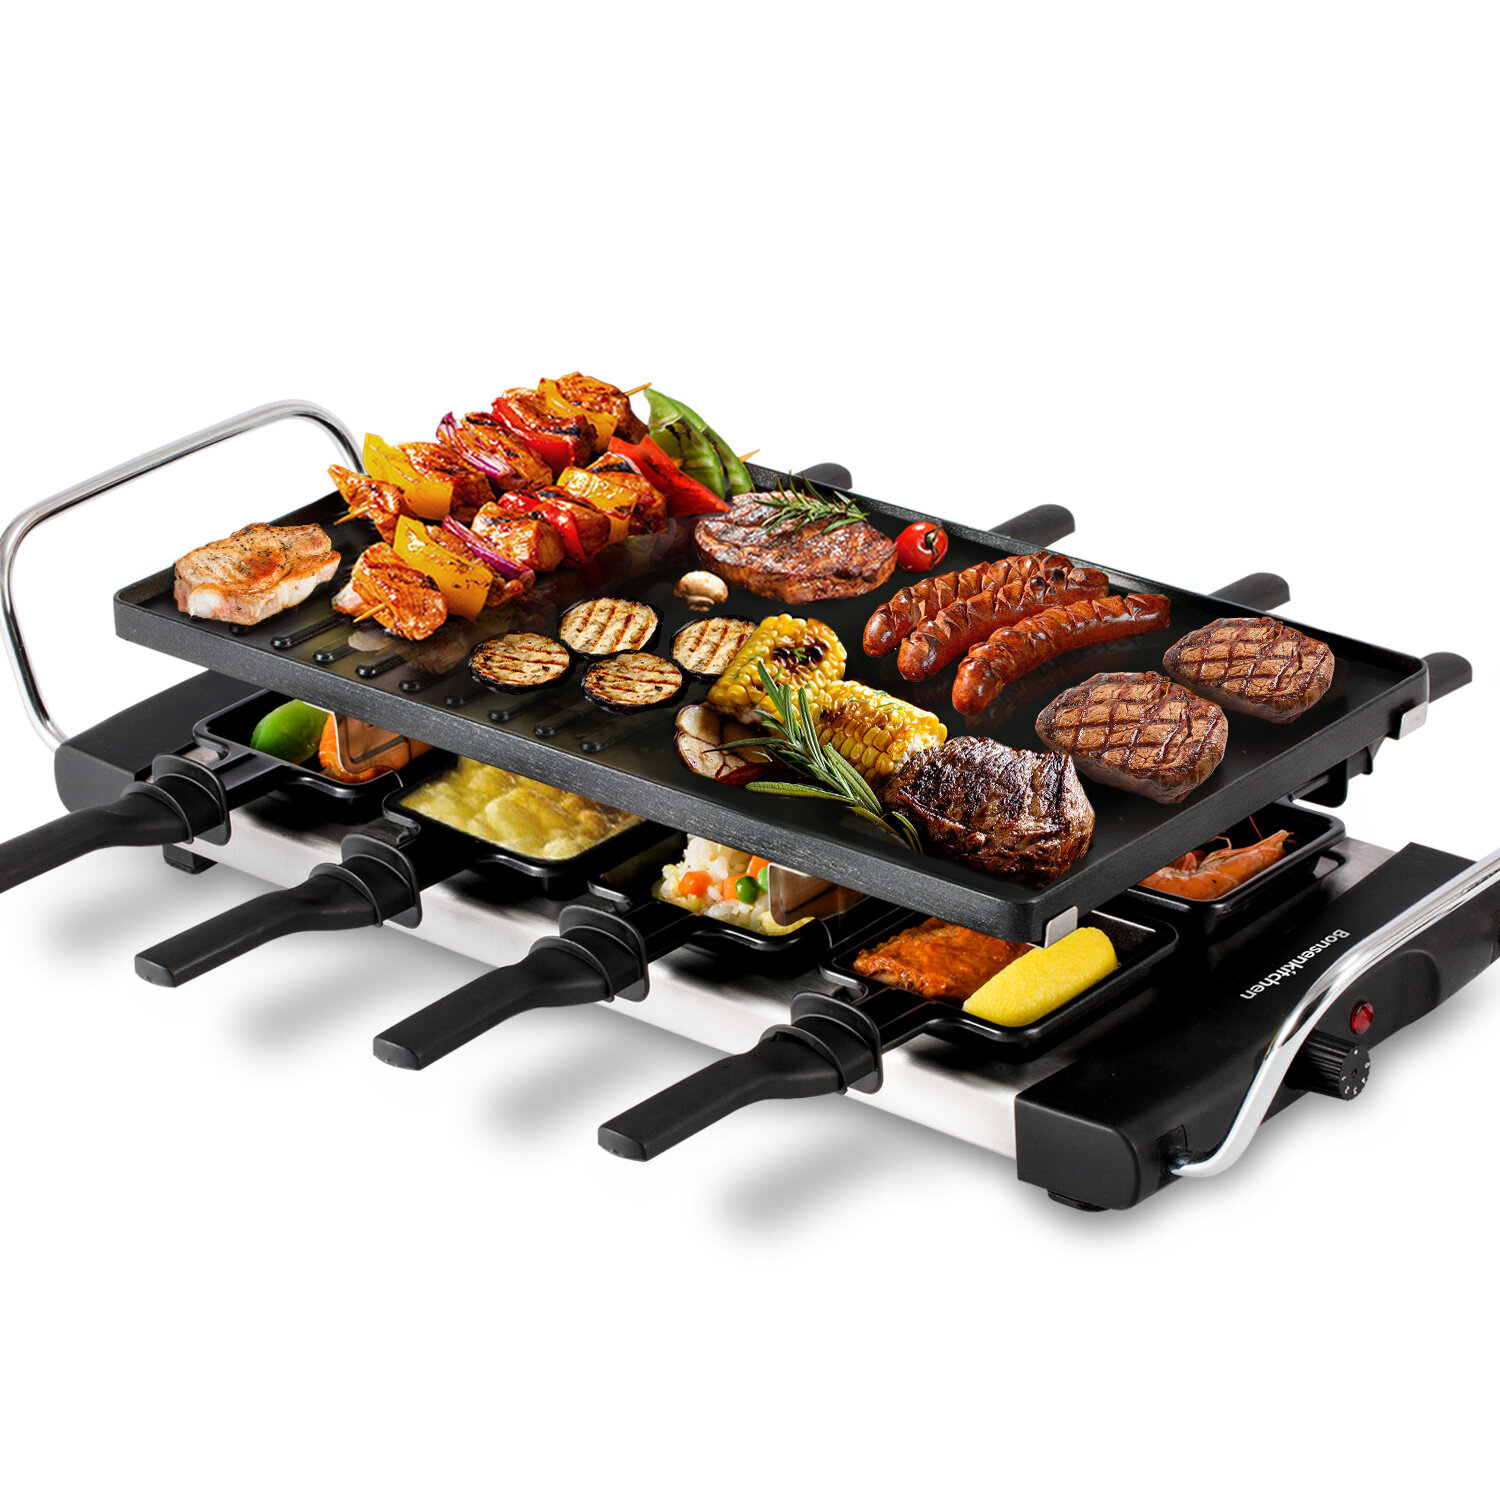 Chef Buddy 4-person Raclette Grill